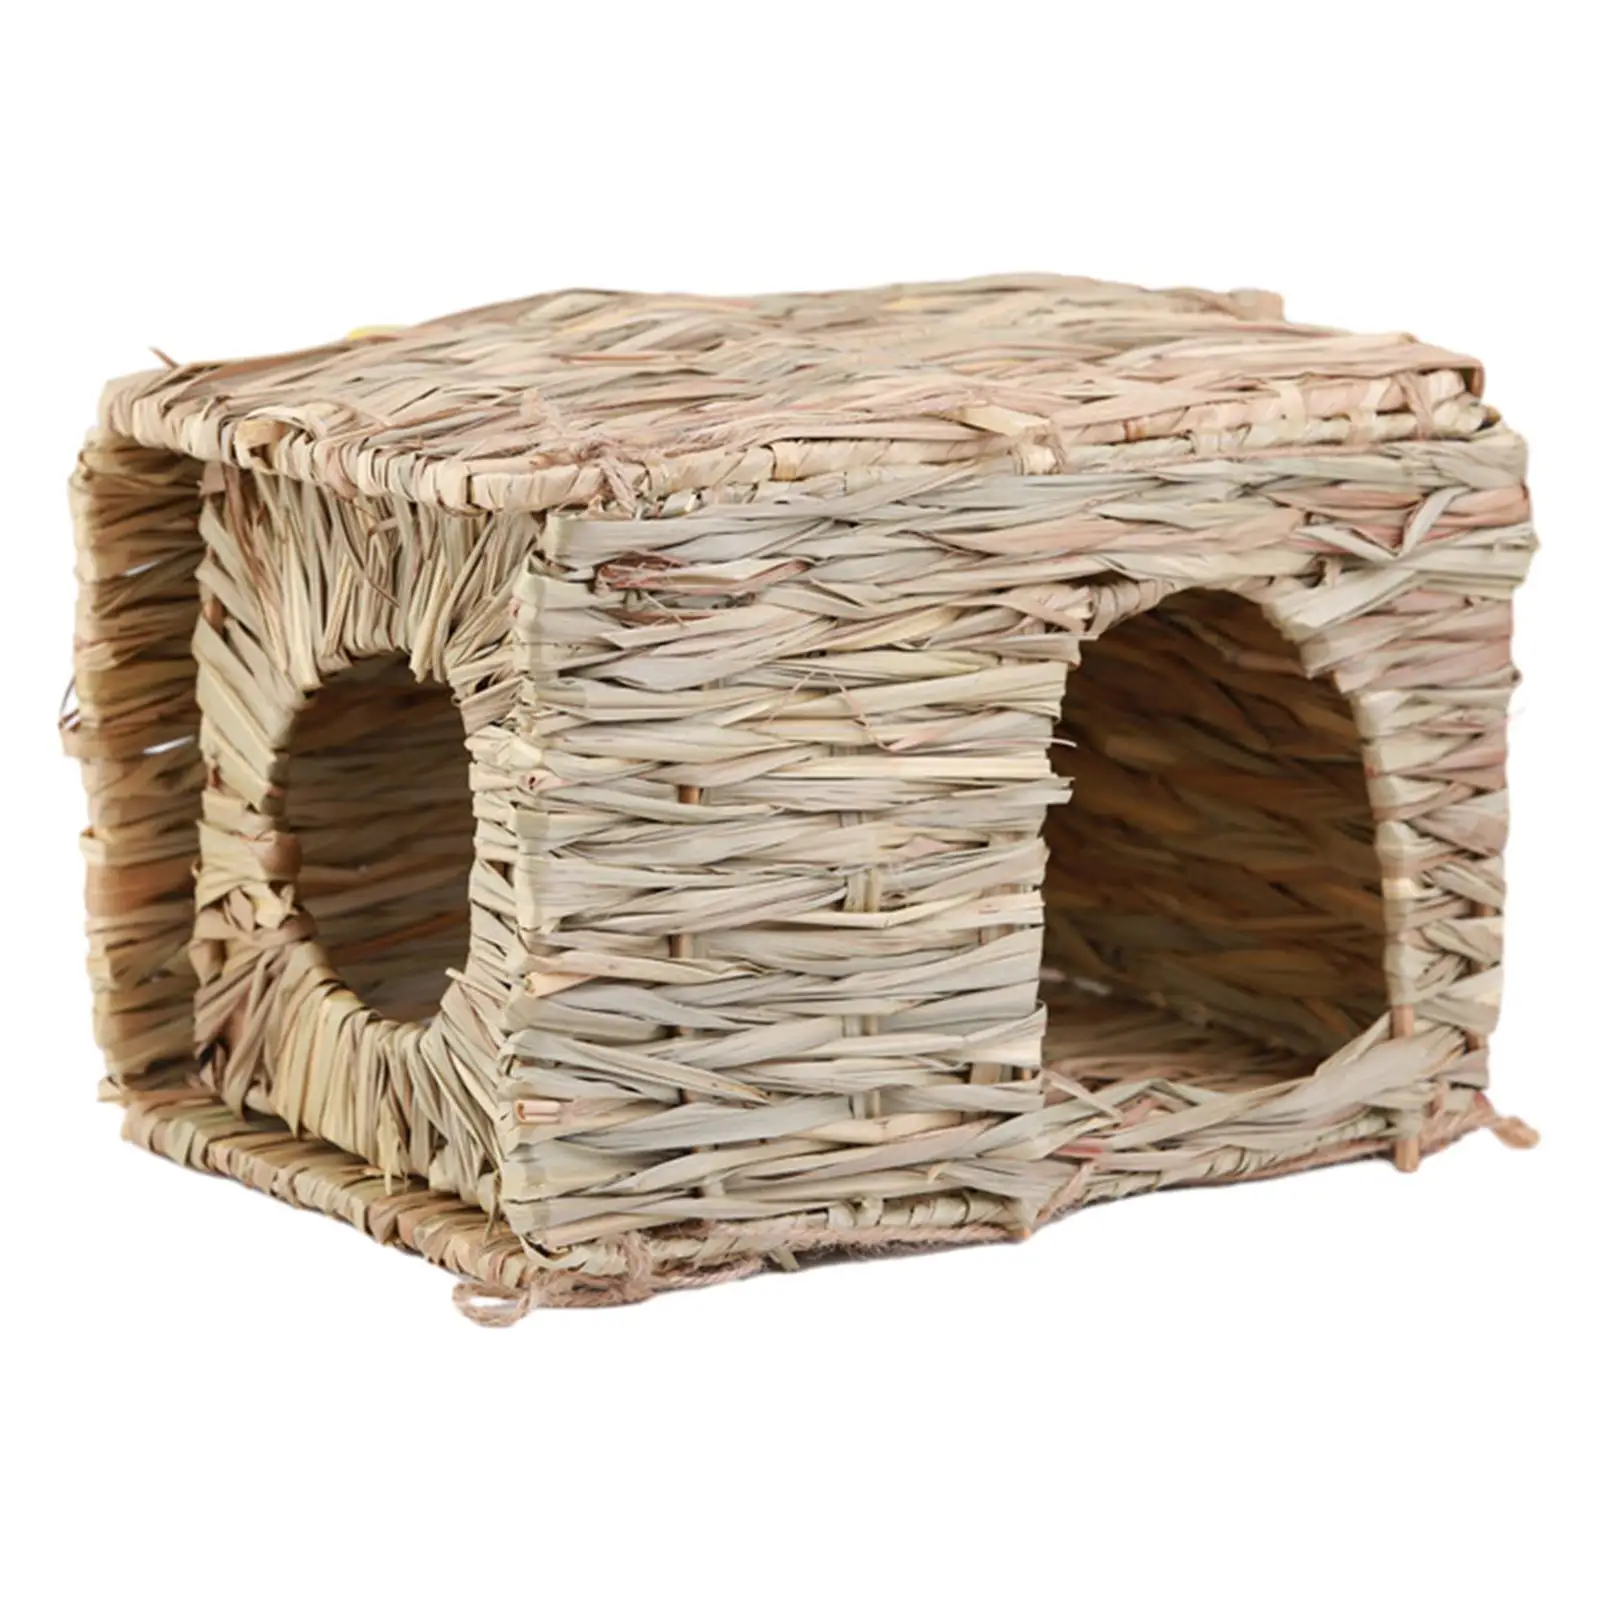 Hand Crafted Grass Hideaway Comfortable Grass Nest for Little Animals Ferret